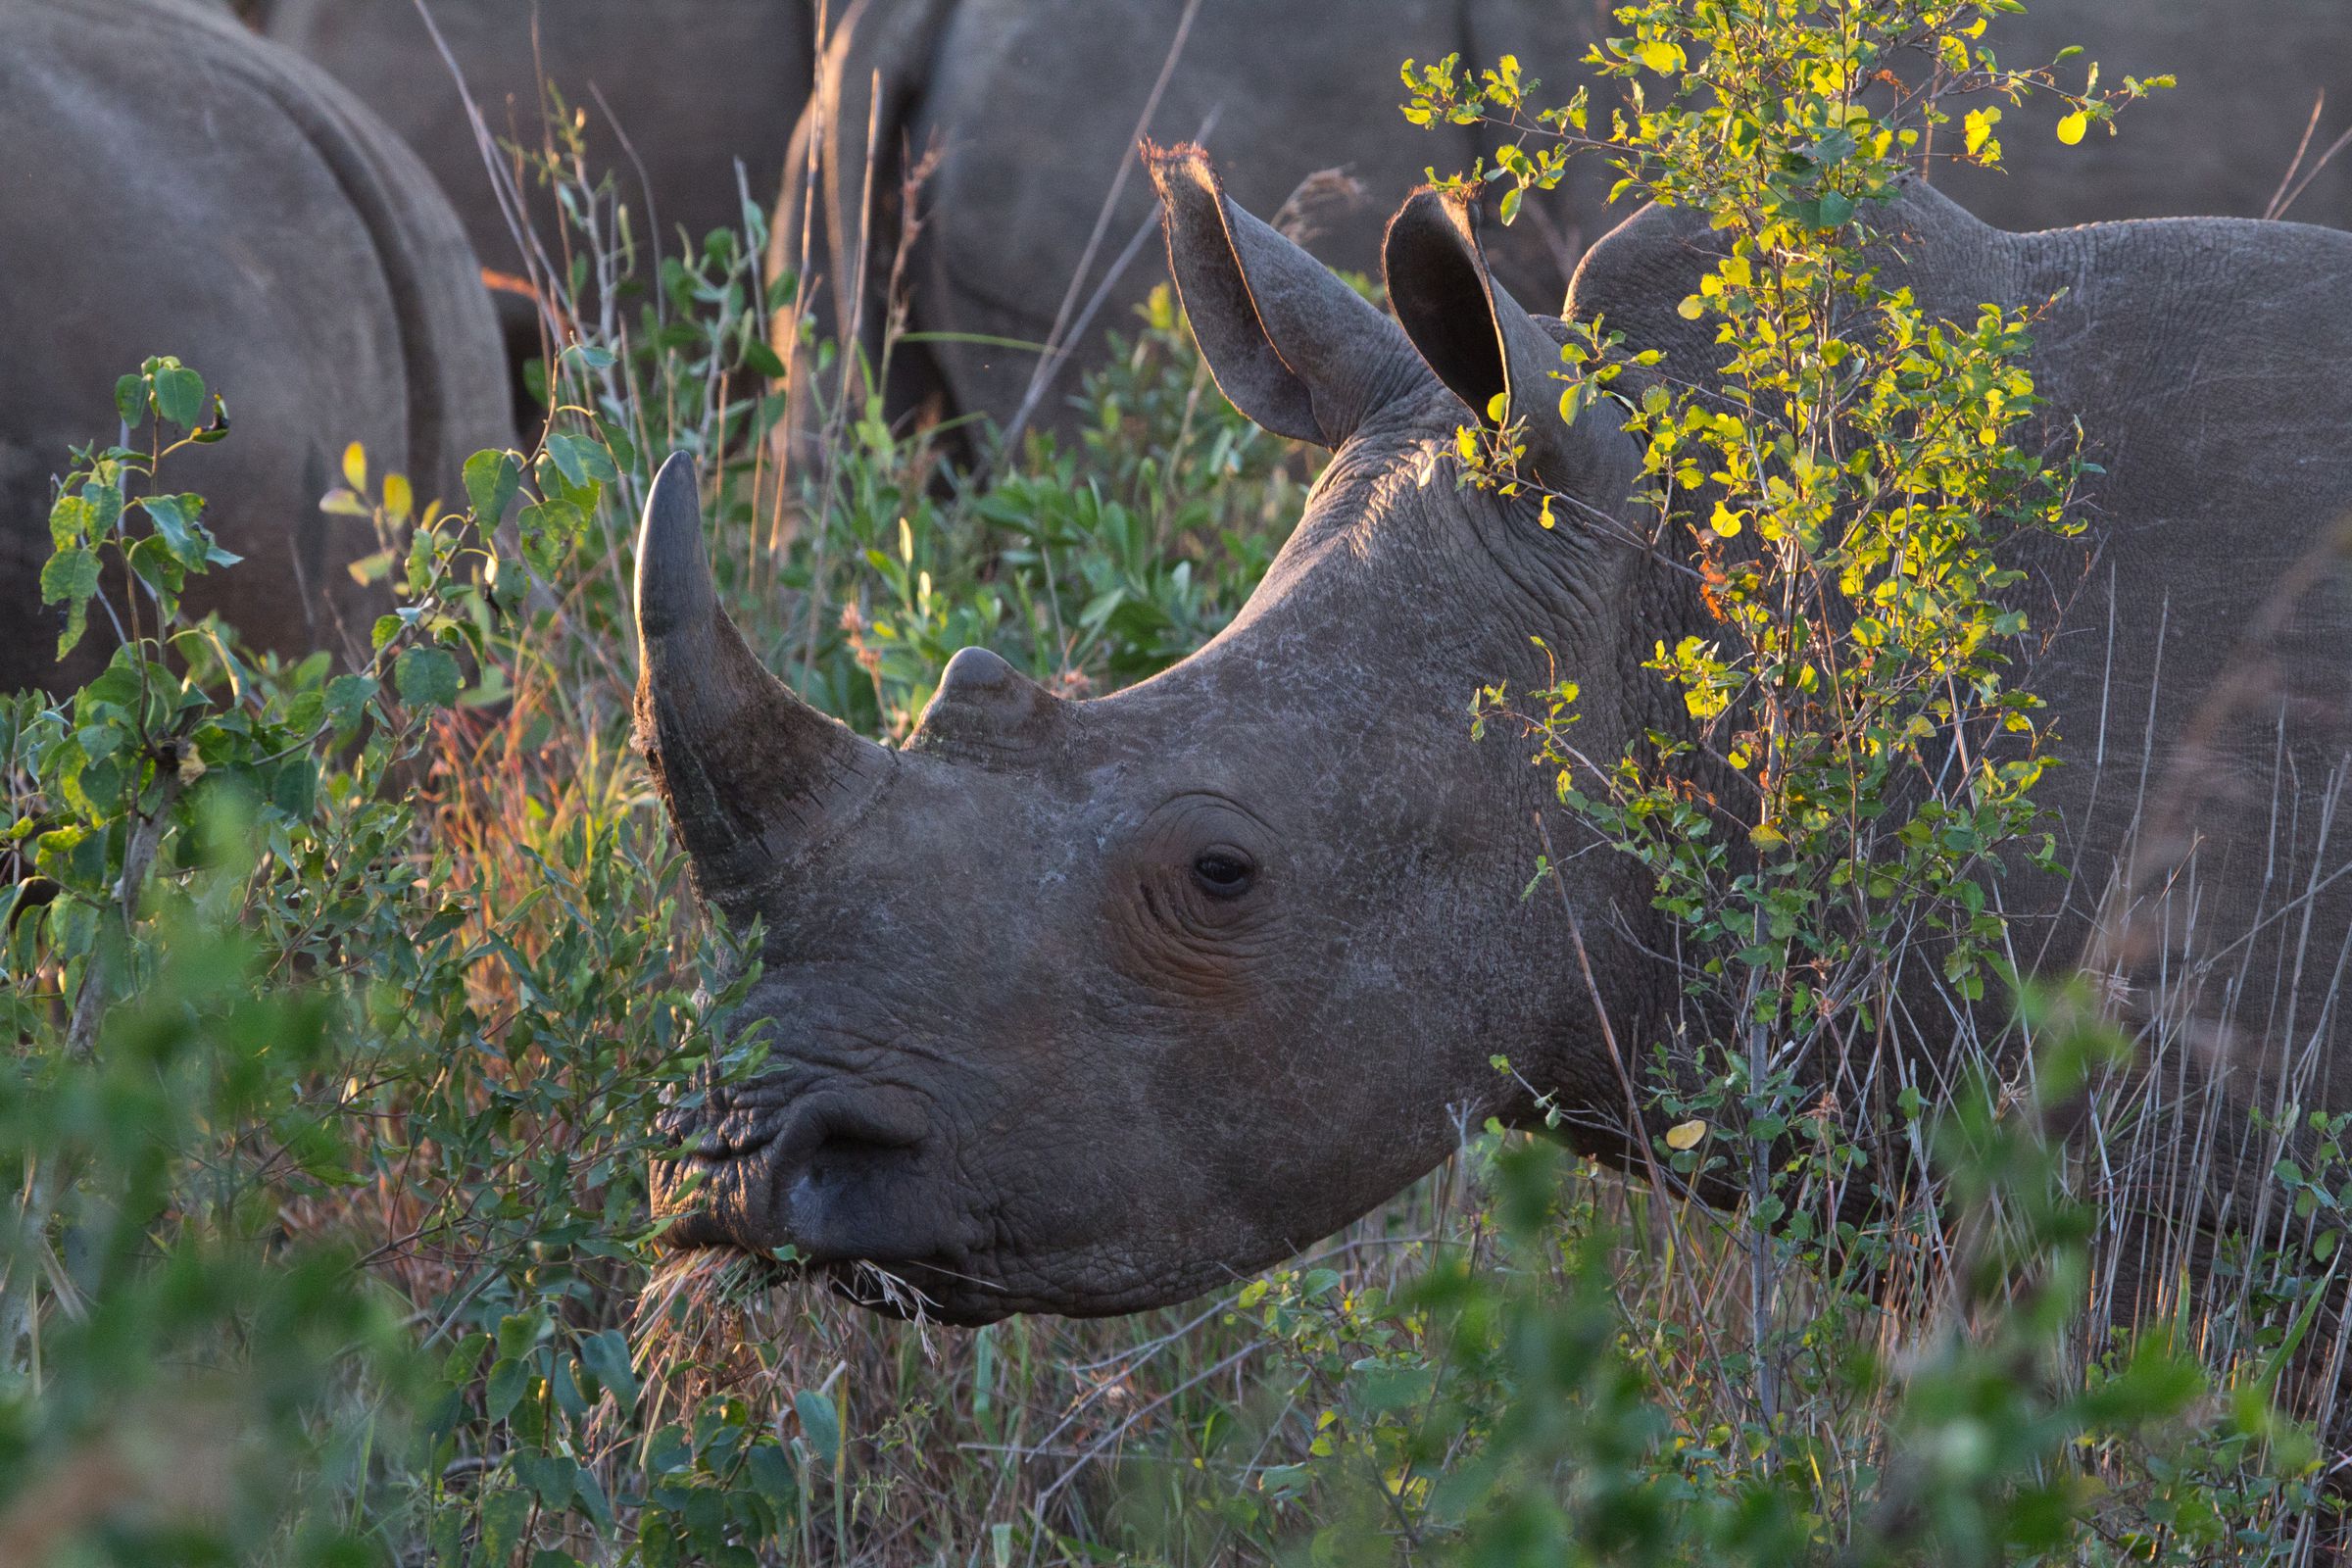 A white rhinoceros in Hluhluwe Game Reserve, in South Africa.